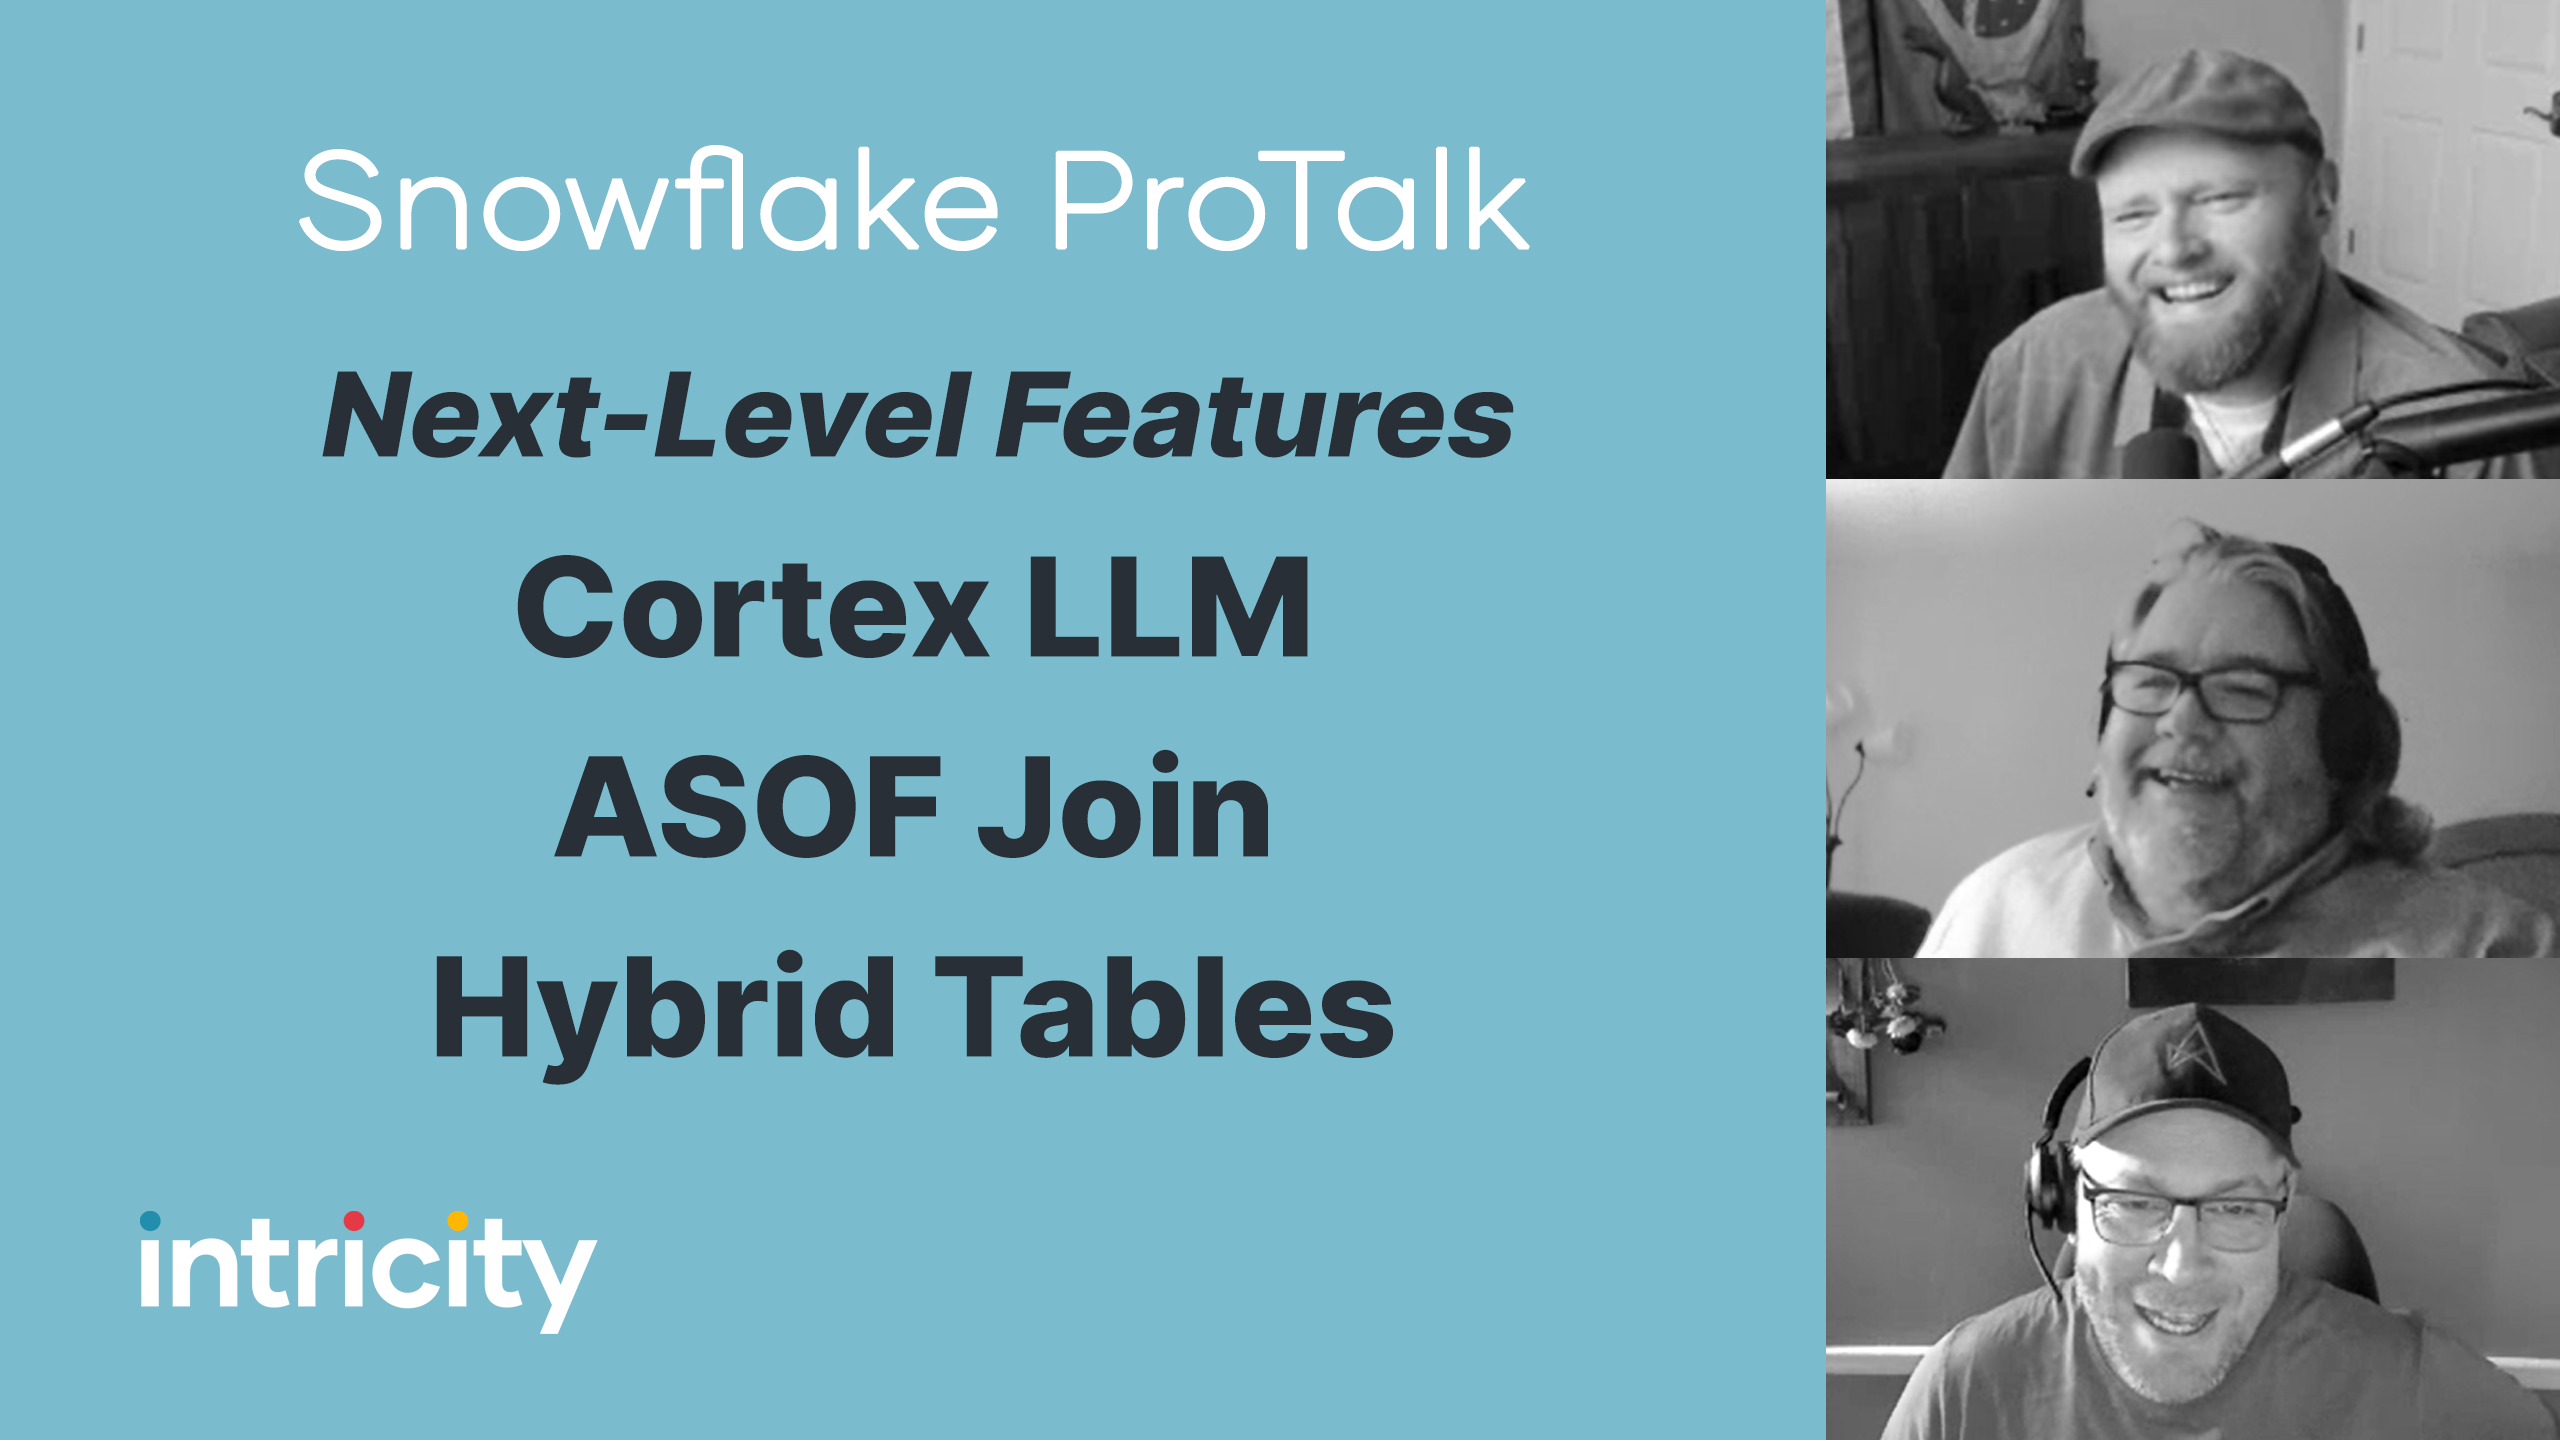 Snowflake ProTalk | Next-Level Features: Cortex LLM, ASOF Join, & Hybrid Tables